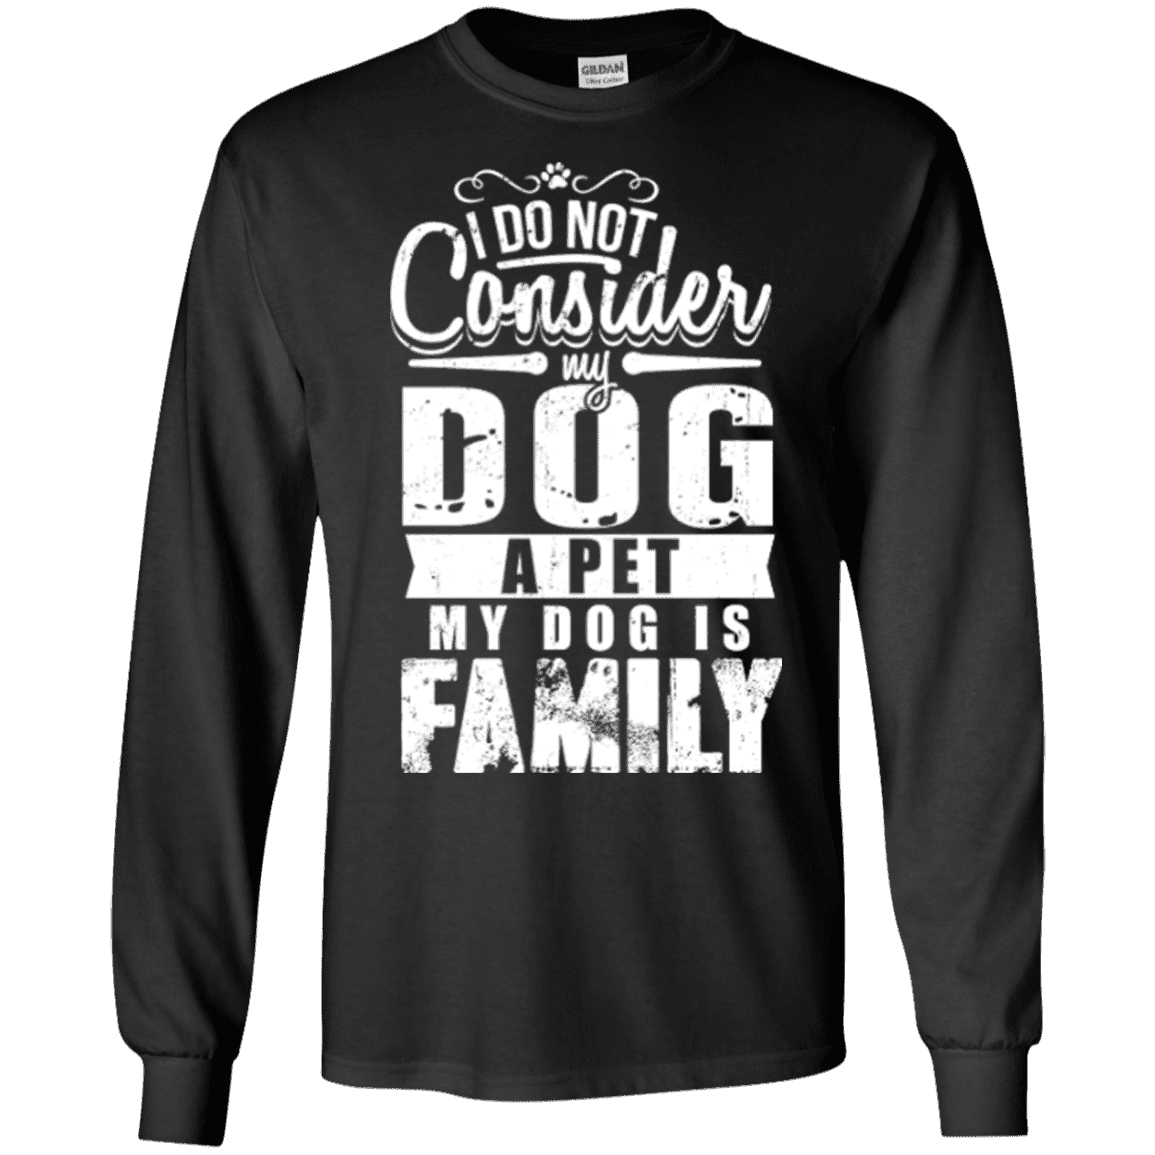 My Dog Is Family - Long Sleeve T Shirt.